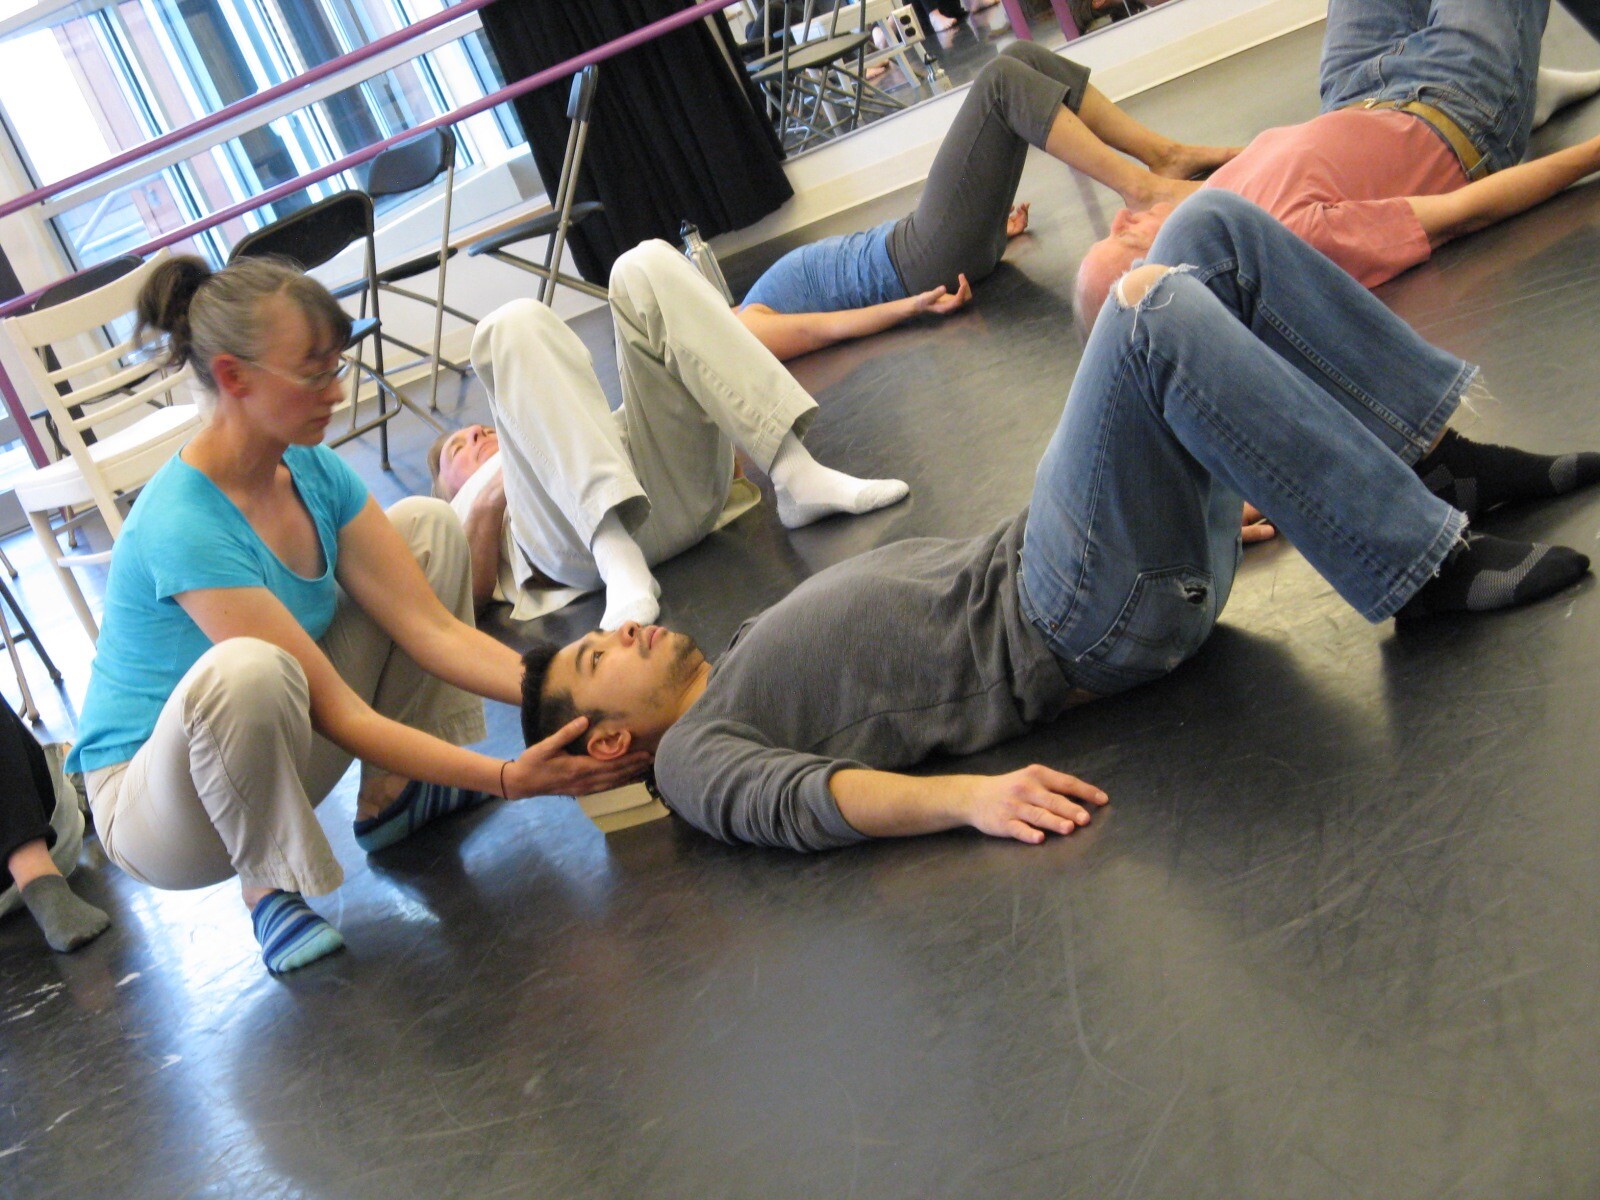 Two people doing an acting exercise on the floor.